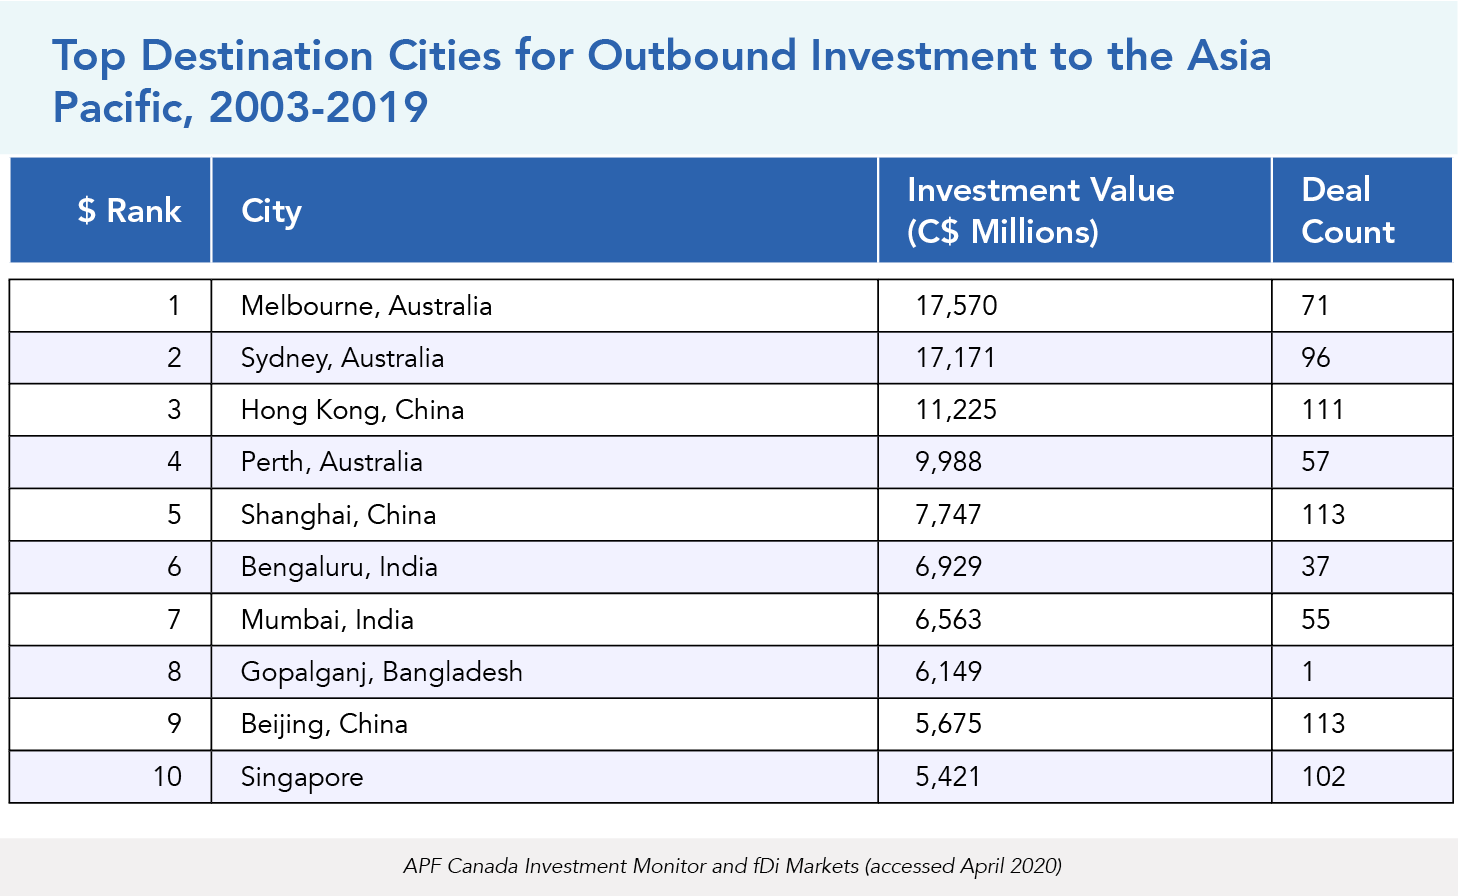 Top Destination Cities for Outbound Investment to the Asia Pacific, 2003-2019